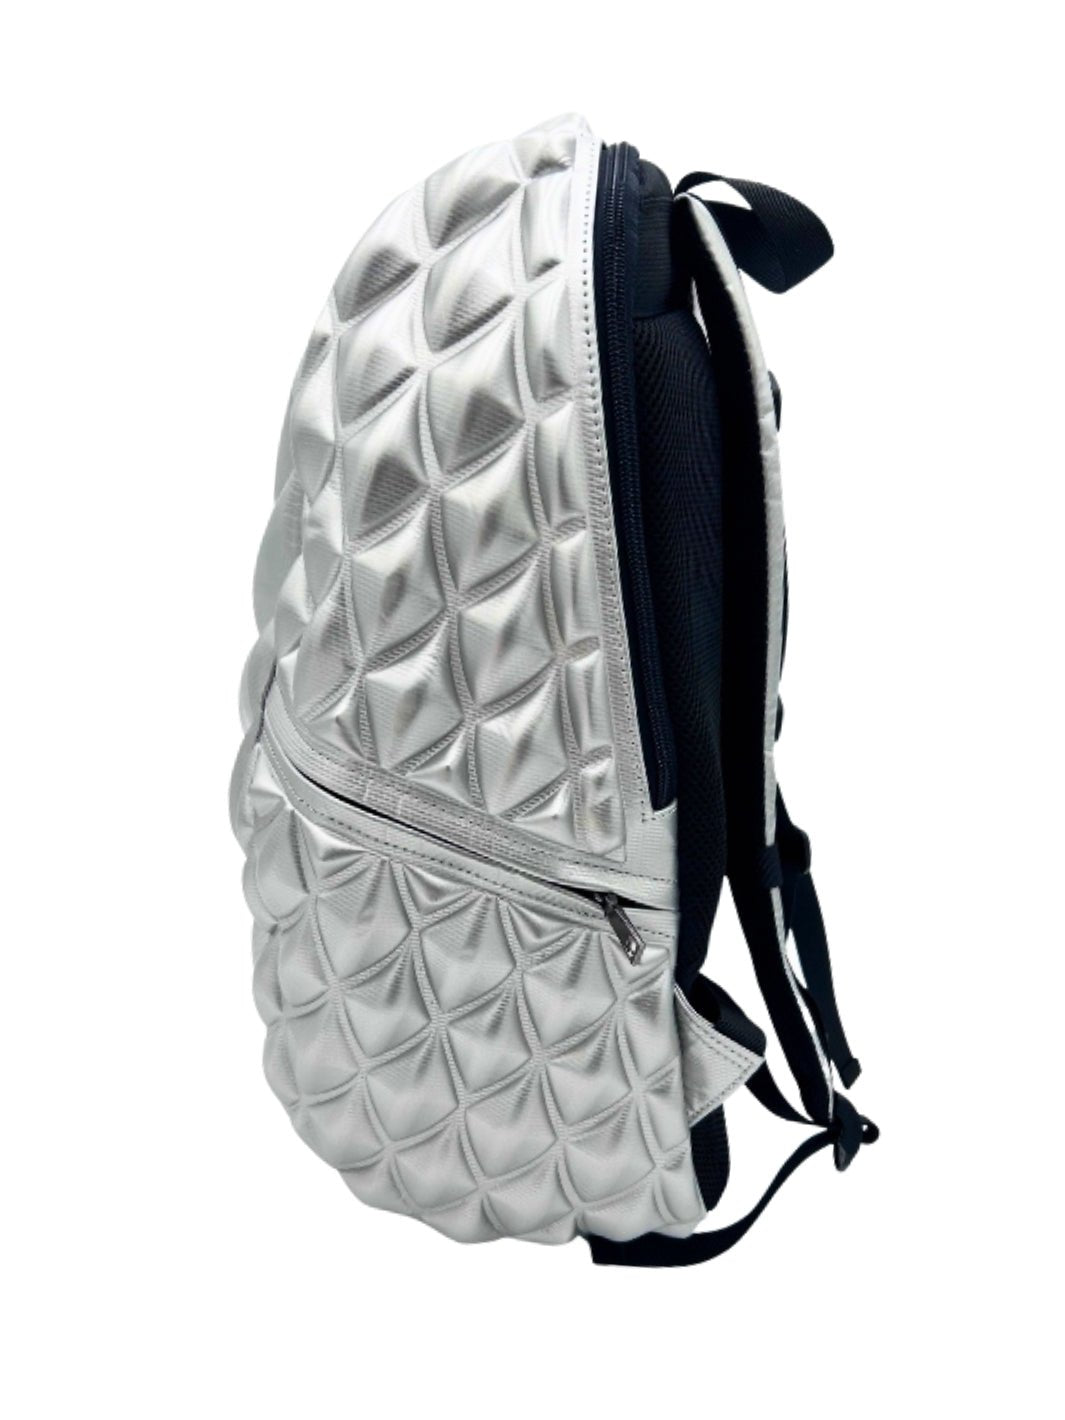 Side View of Hi-Ho Silver Backpack - Madpax